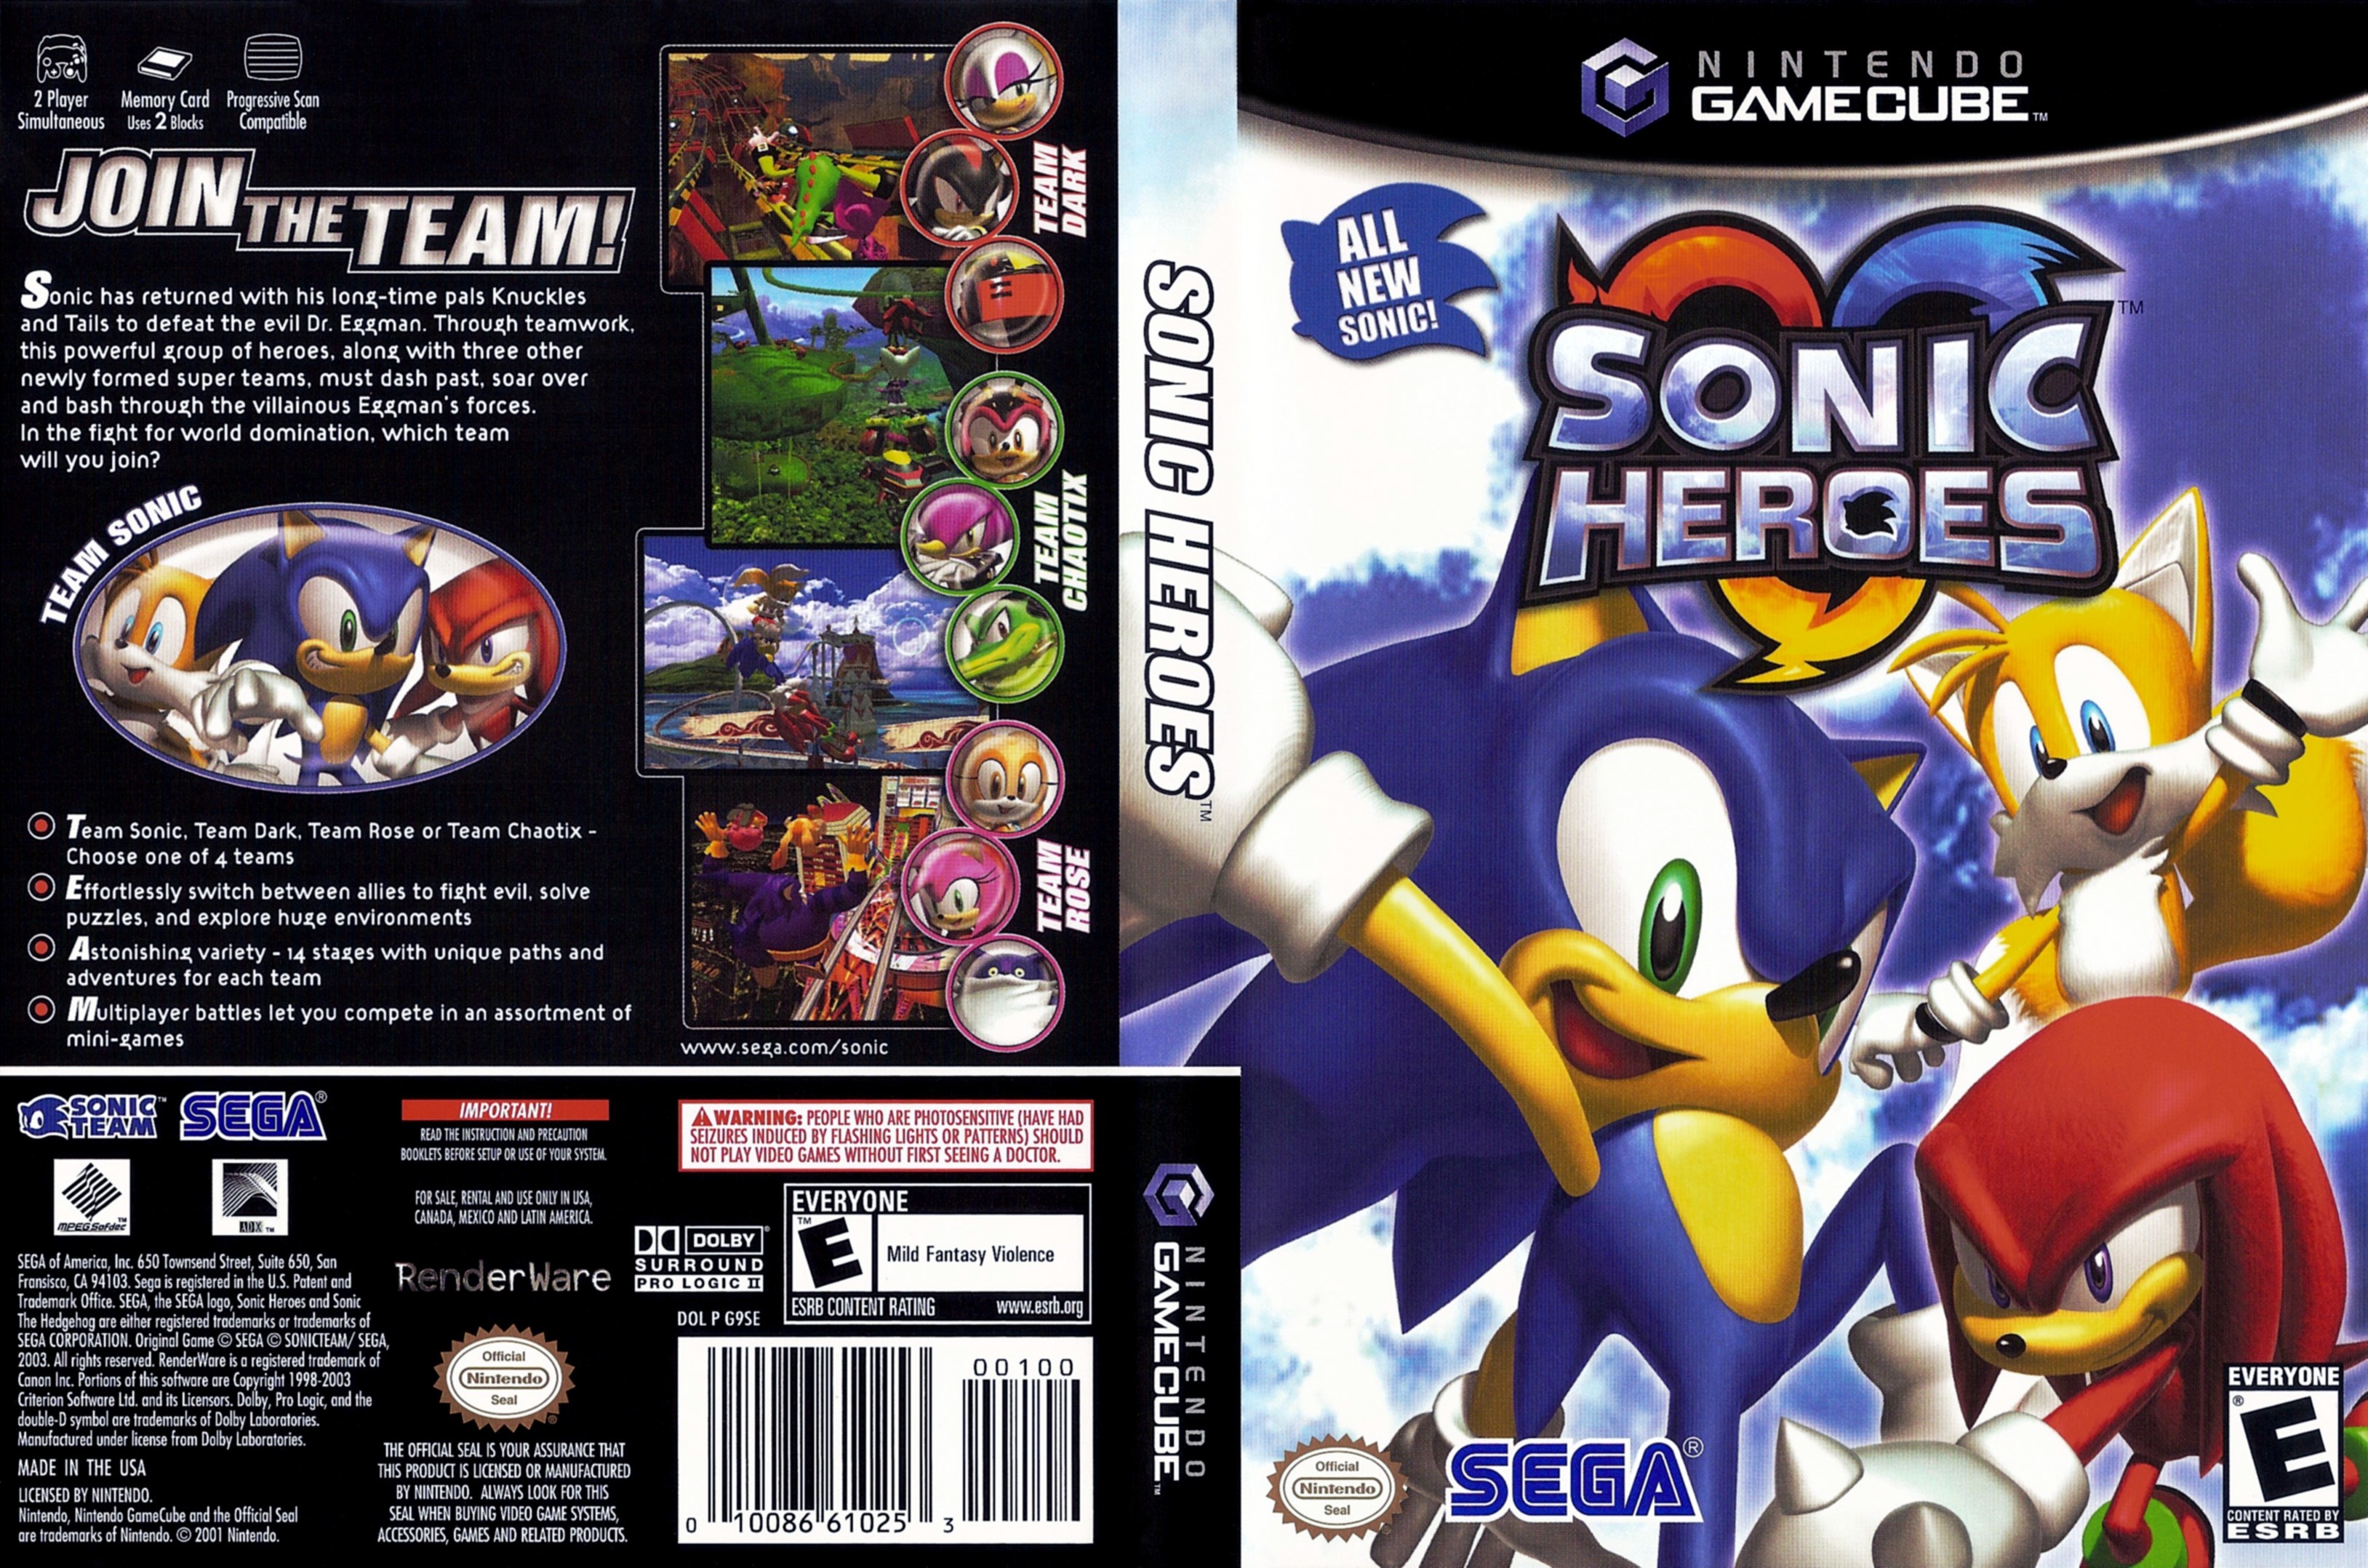 mission sonic riders pc